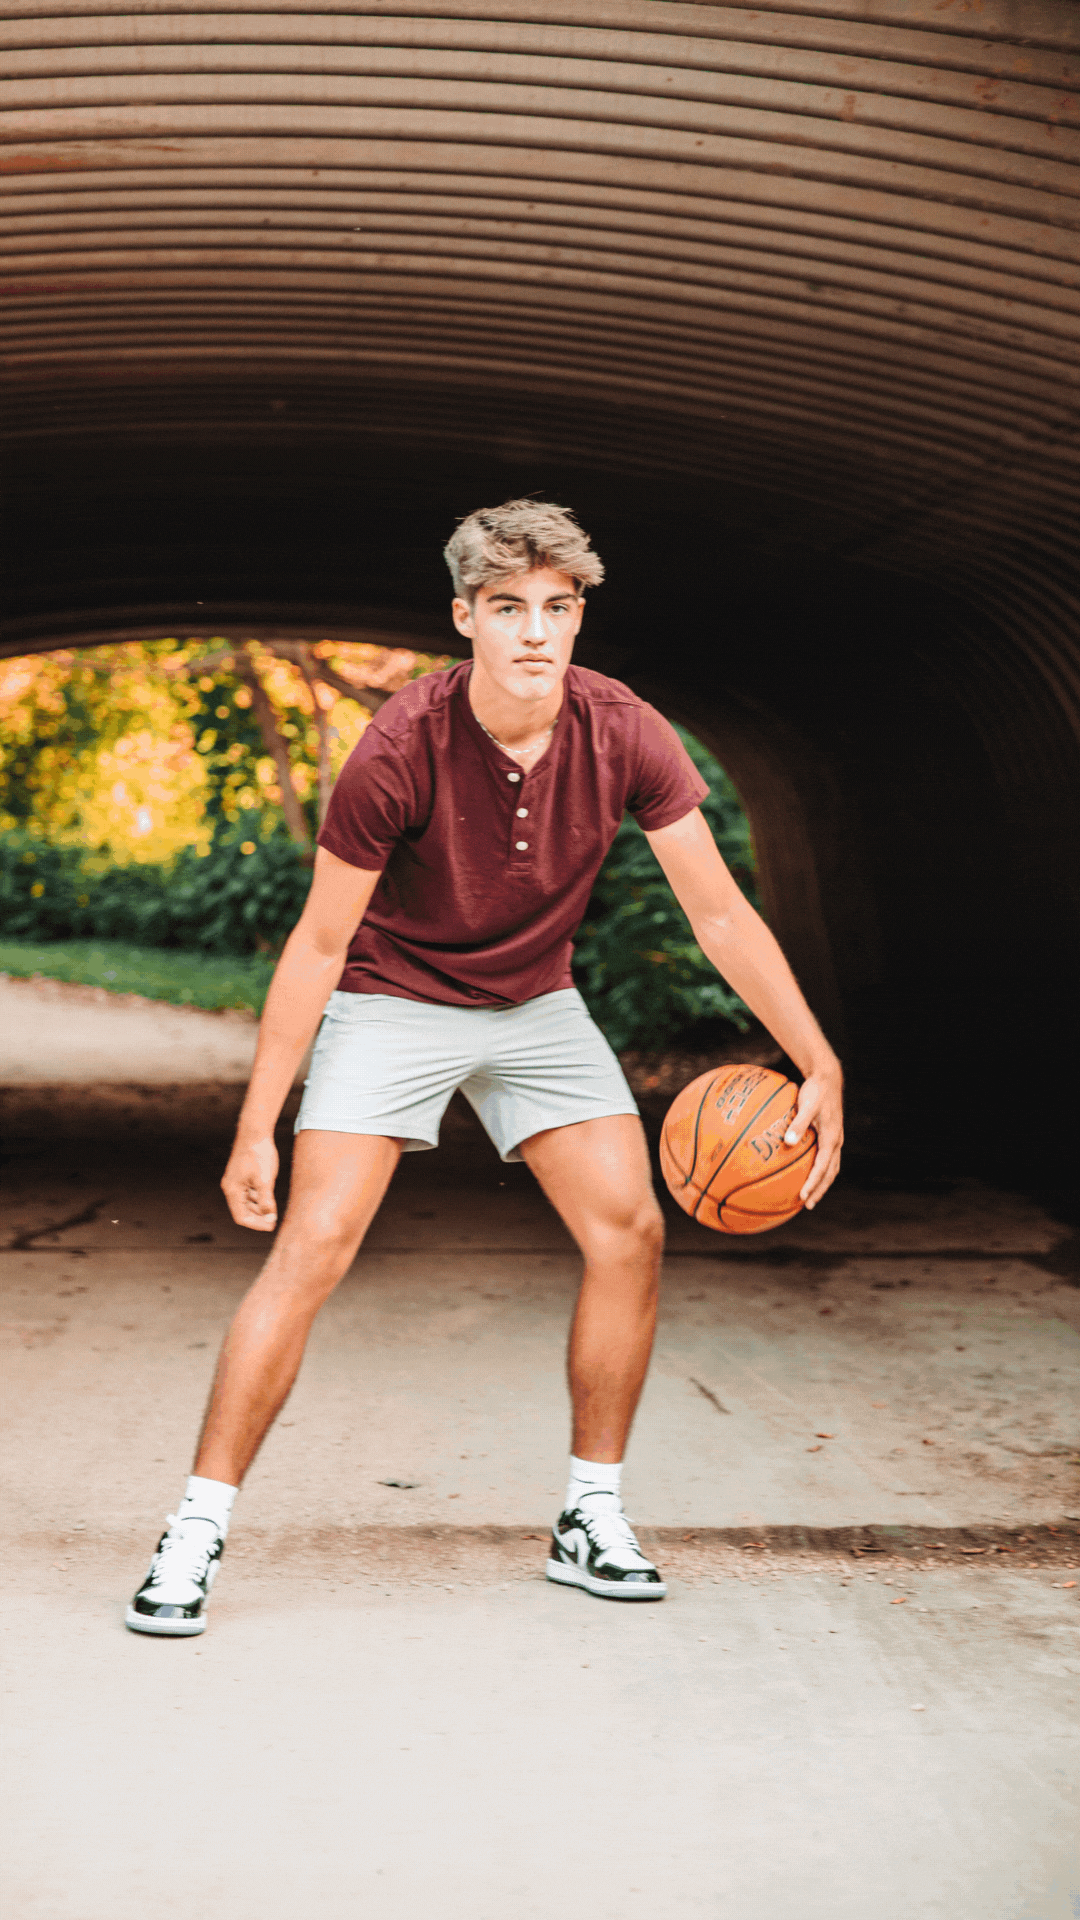 Senior playing basketball during their senior photography experience